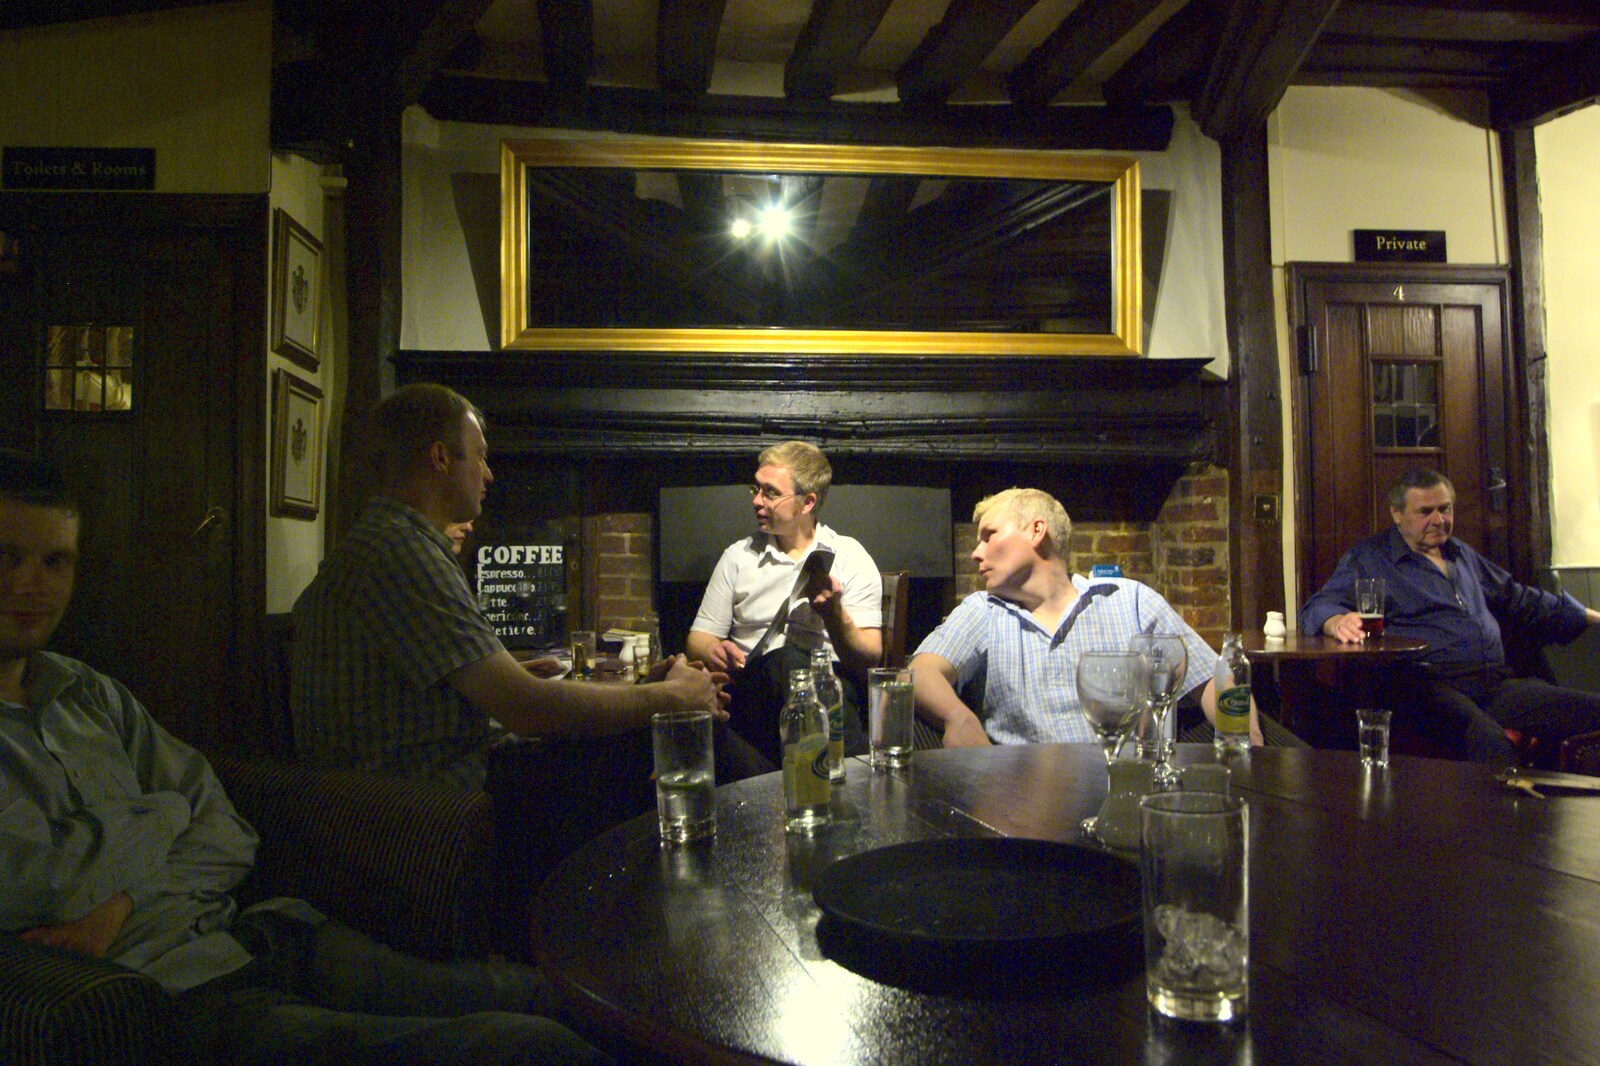 The BSCC Weekend Away, Buckden, St. Neots, Huntingdonshire - 15th May 2010: The late-night crowd